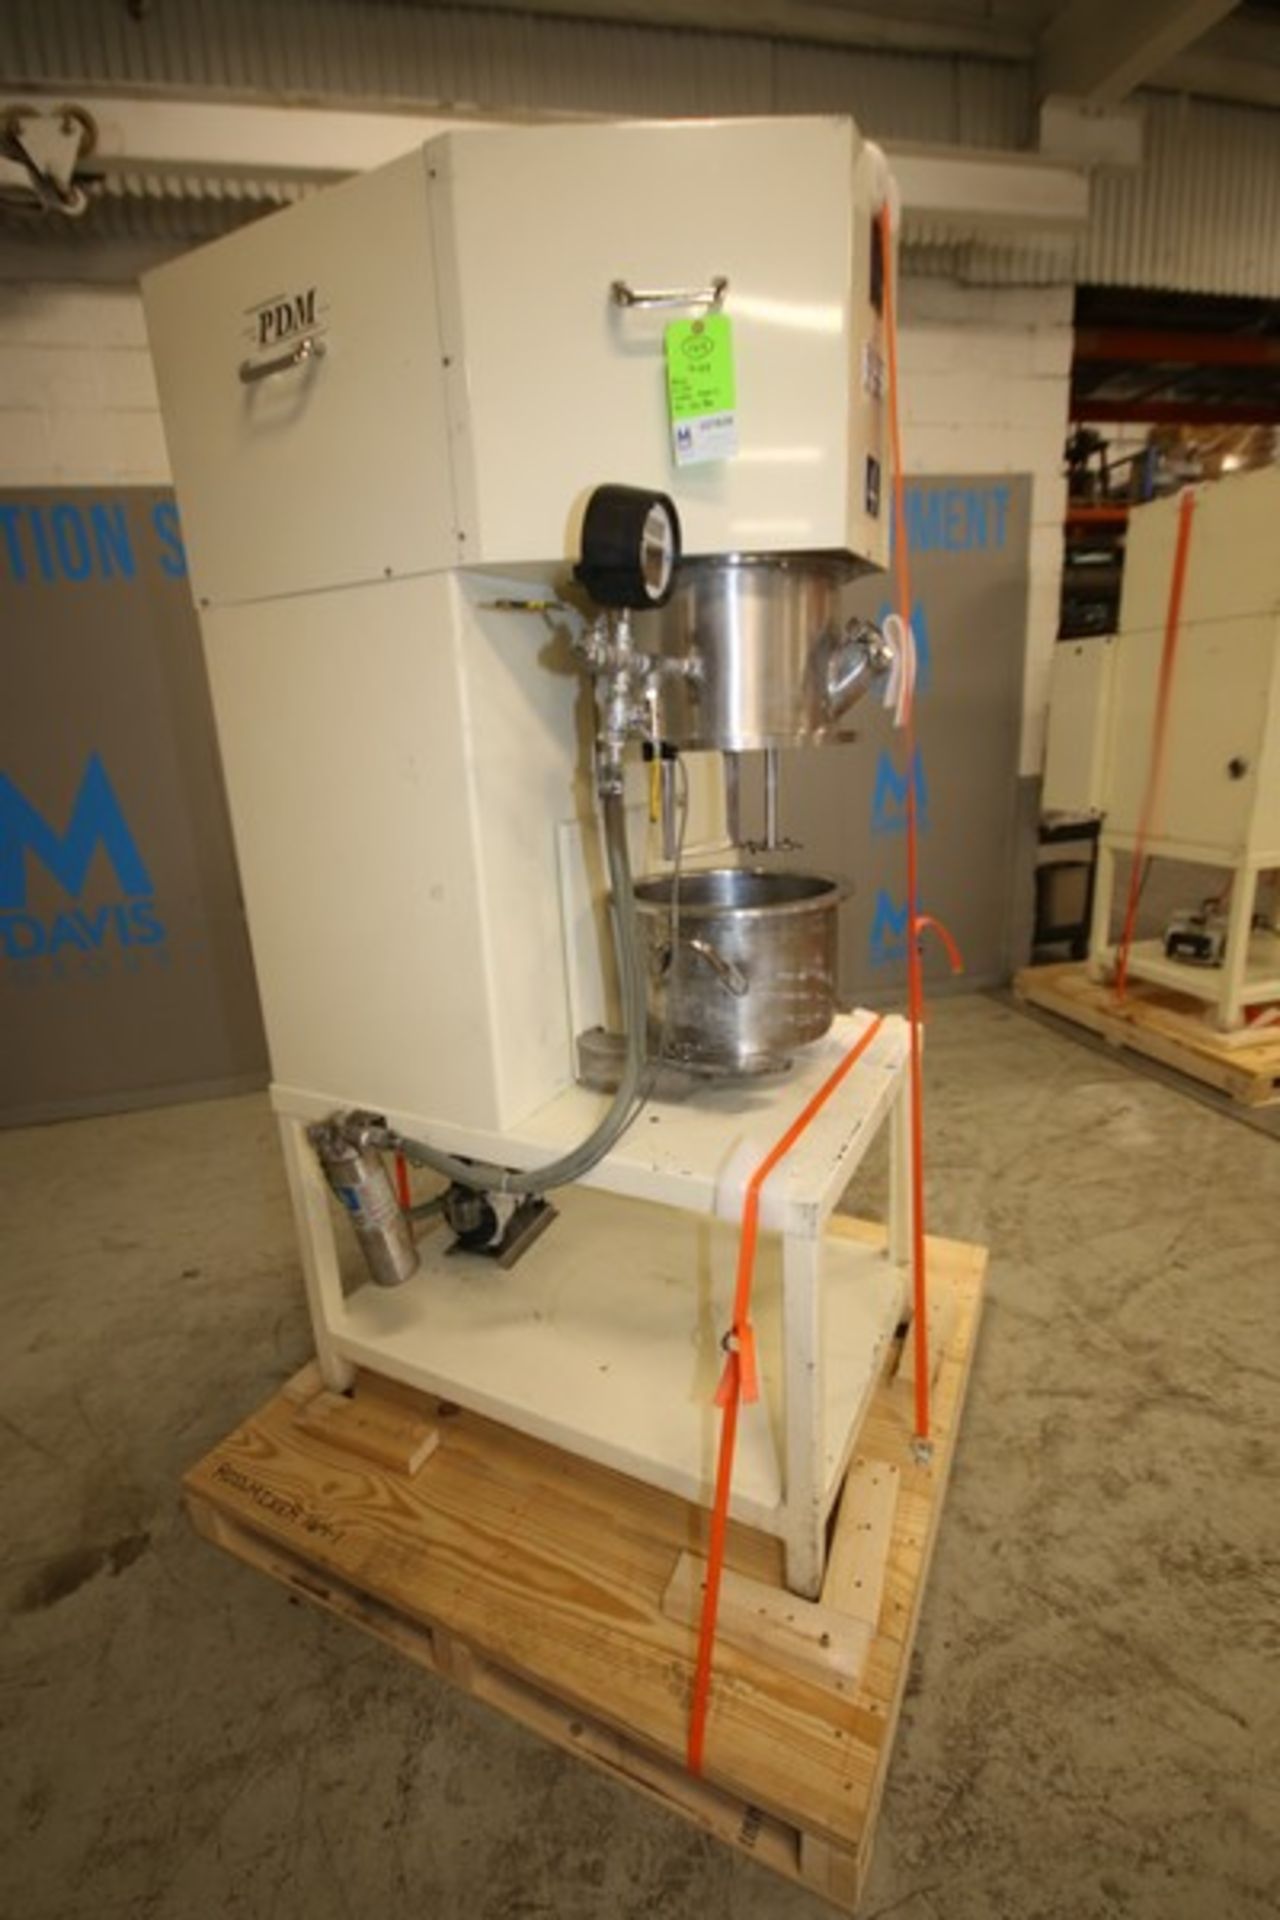 Ross Planetary Mixer, Model PDM-4, SN 106786, with Stirrer & Disperser, 14" W x 8" D S/S Mixing